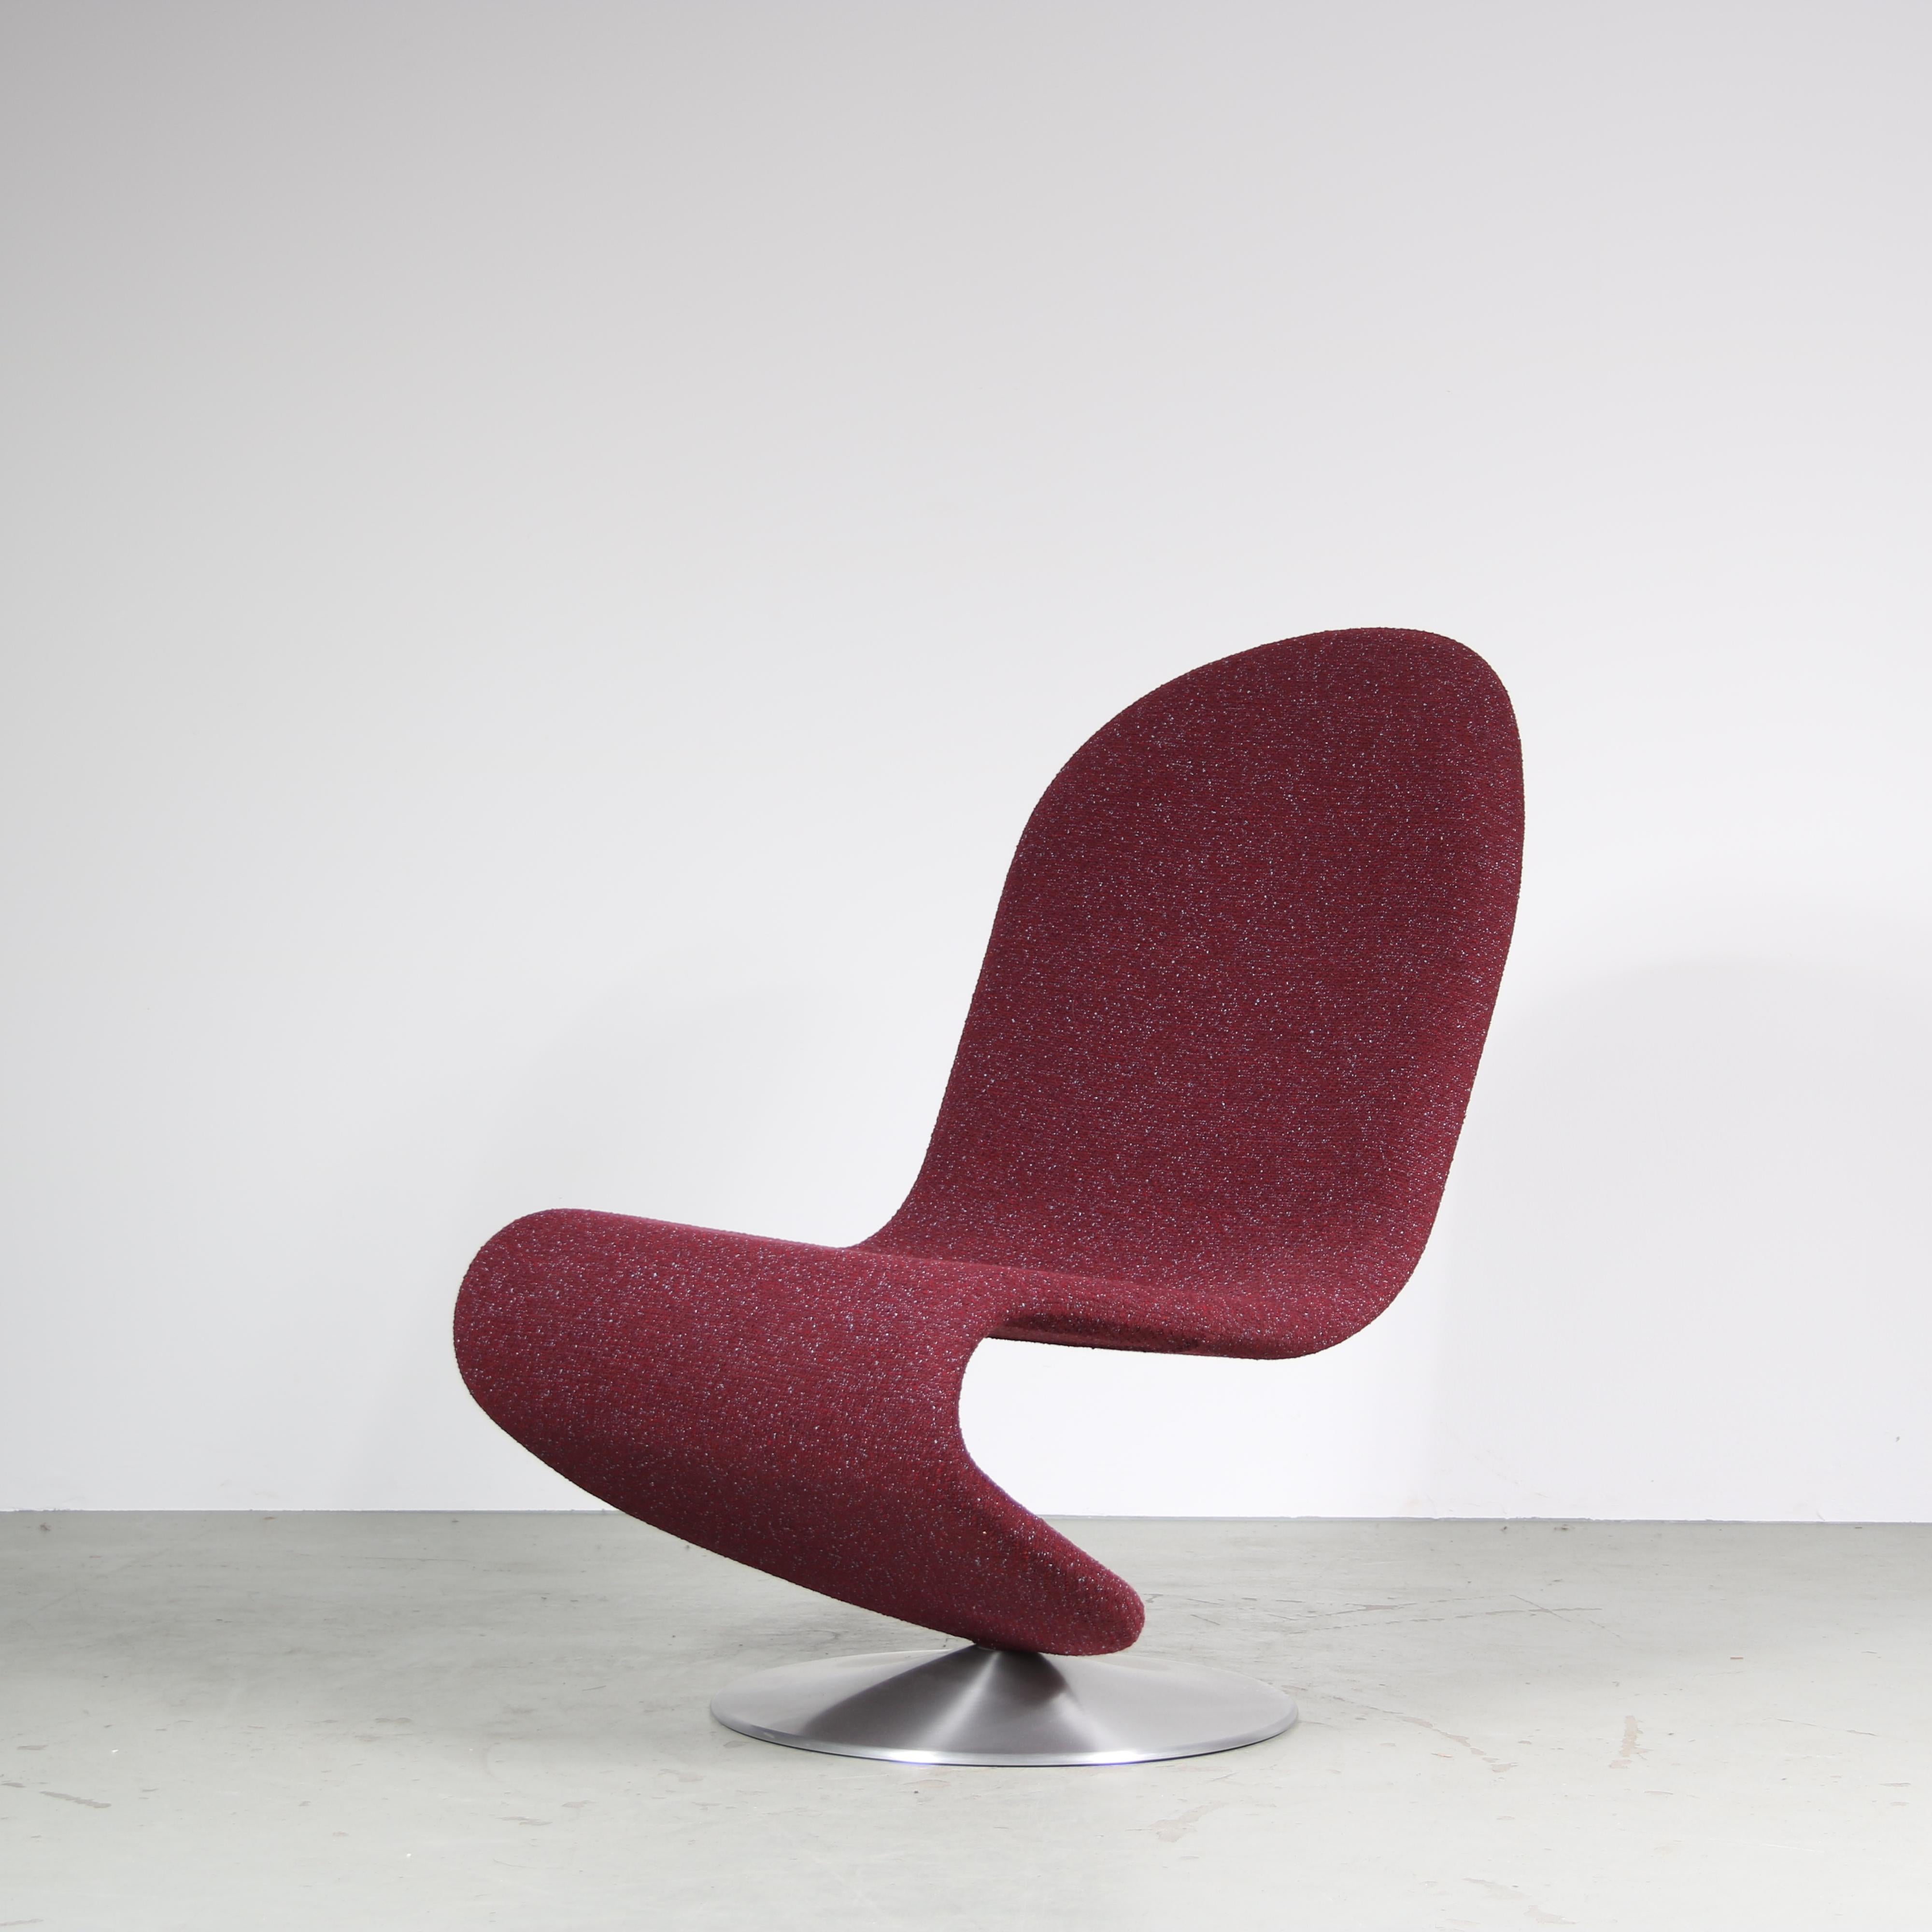 A beautiful “1-2-3” easy chair, a famous design by Verner Panton from the 1970s, manufactured by VerPan in Denmark in the 2020s.

It has a round aluminum metal base and beautiful purple Kvadrat fabric upholstery of the highest quality. These